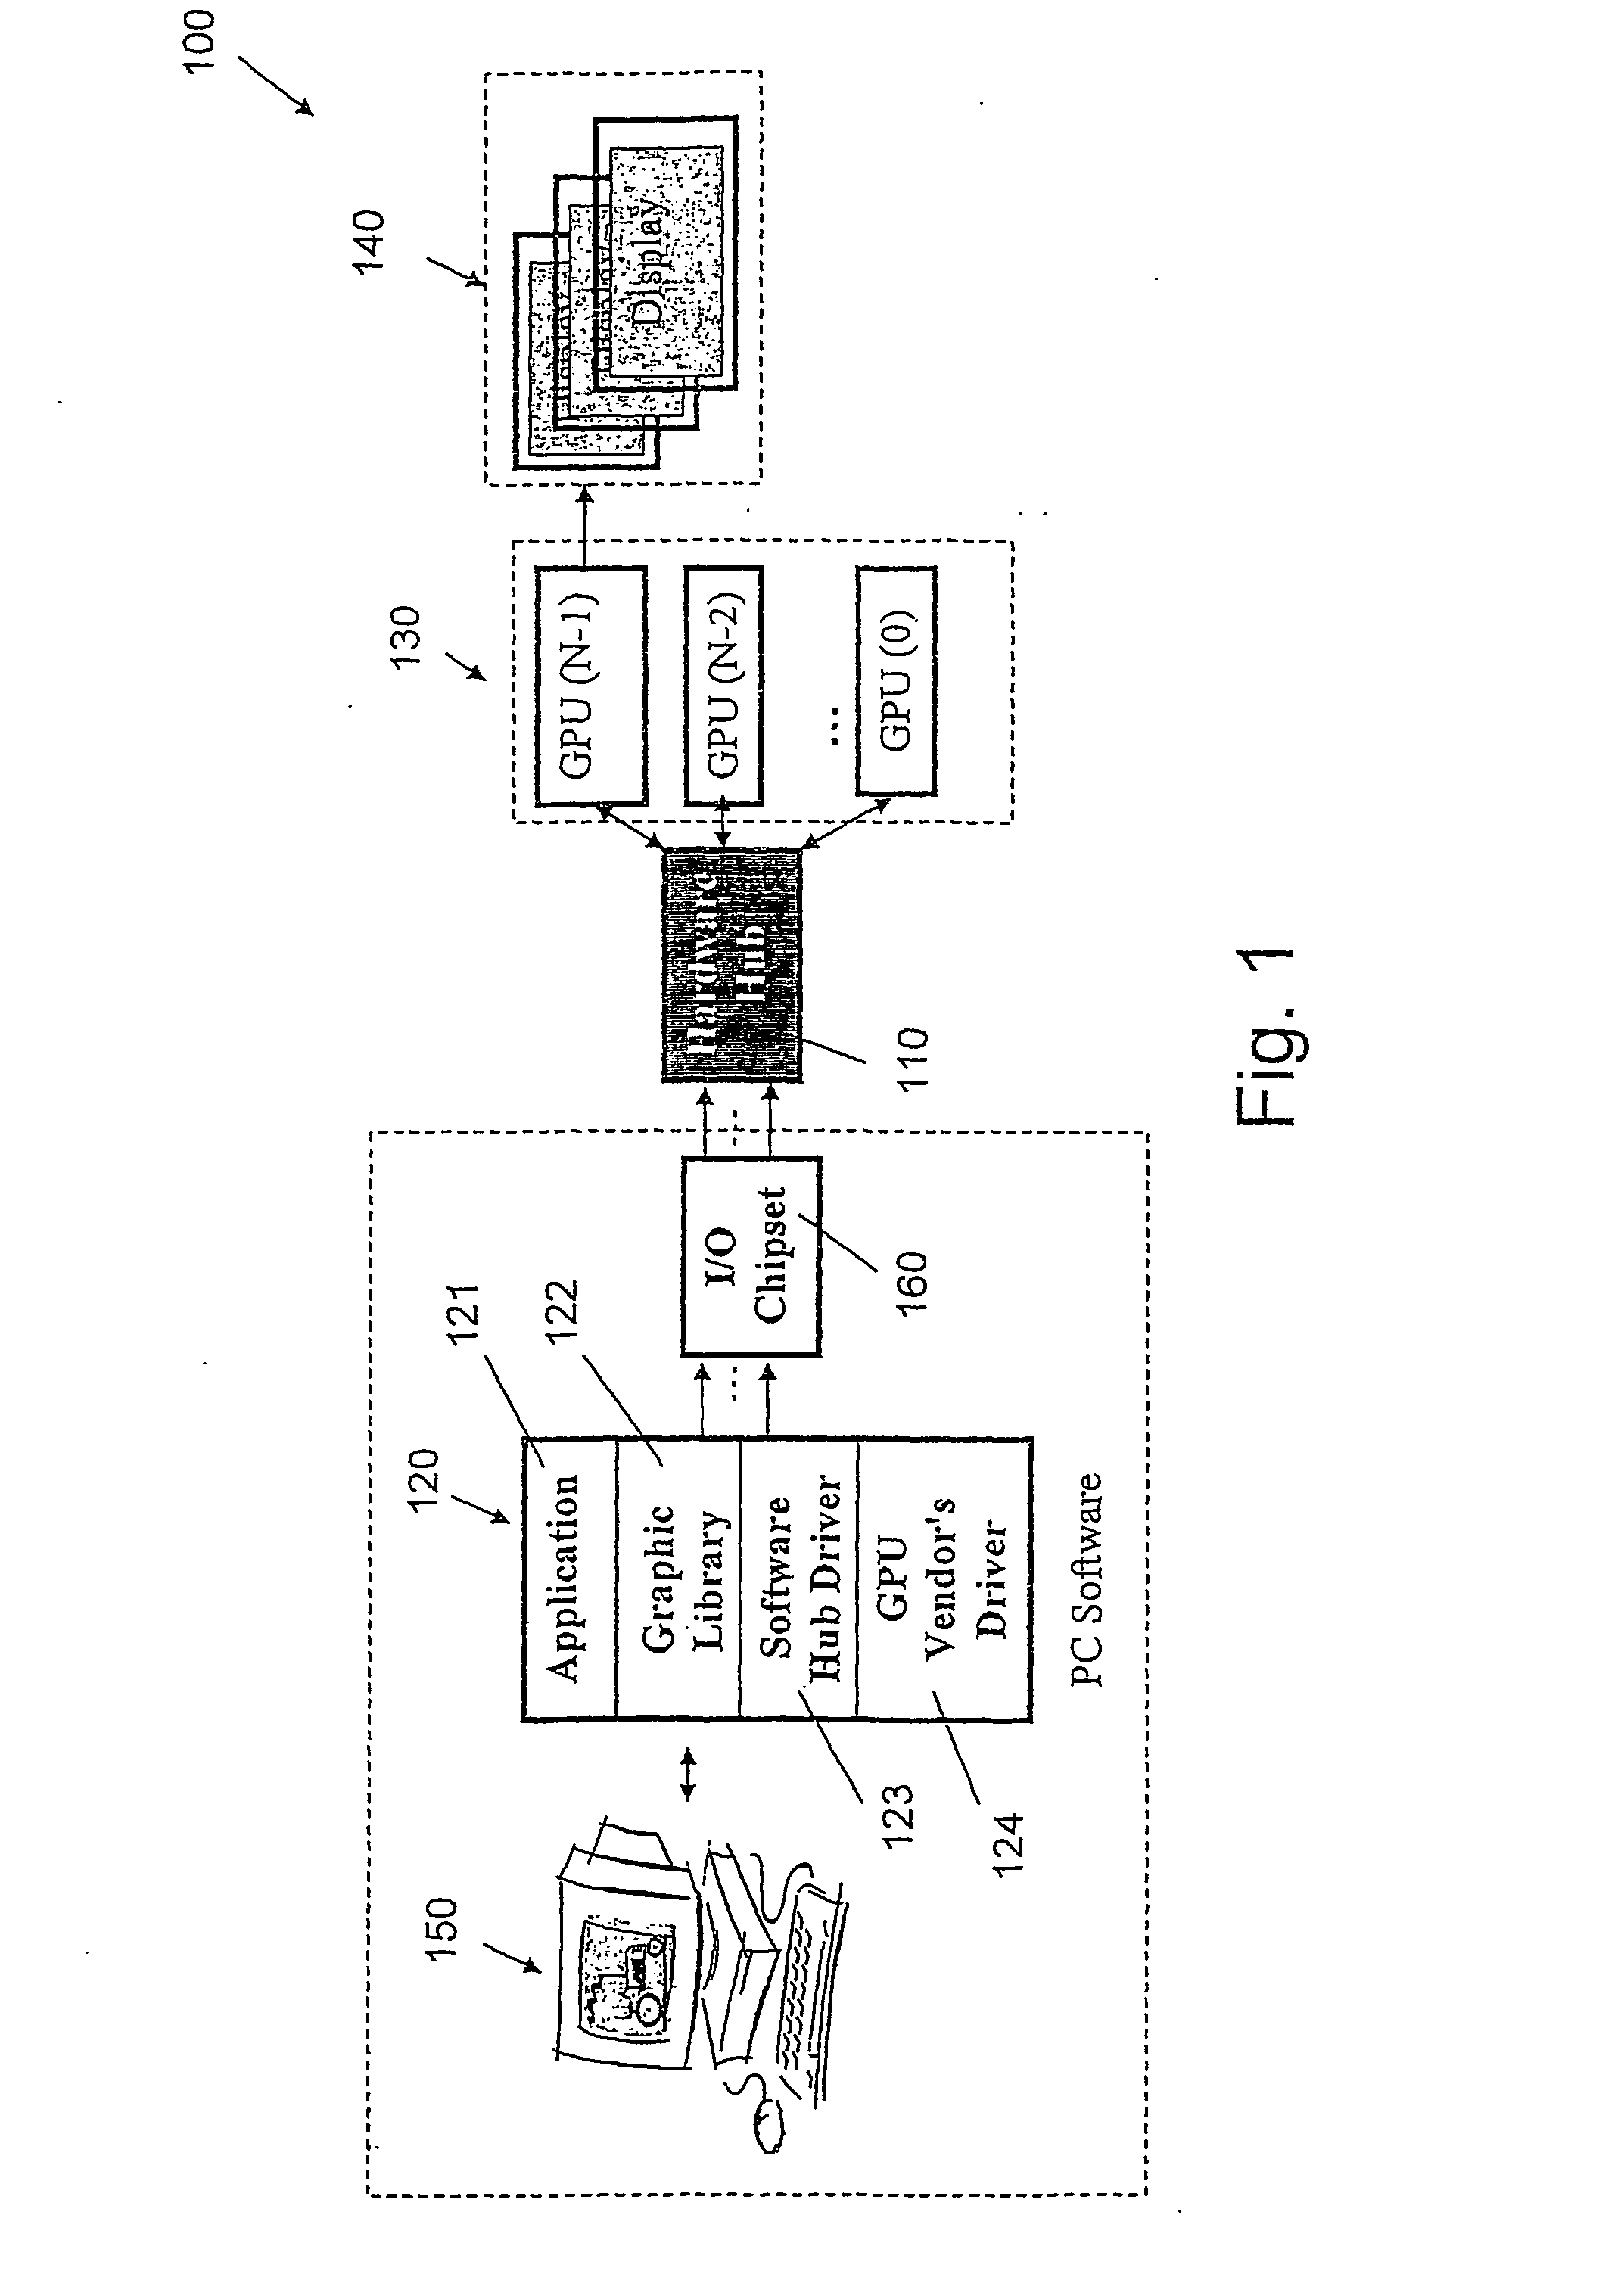 Method and System for Multiple 3-D Graphic Pipeline Over a Pc Bus